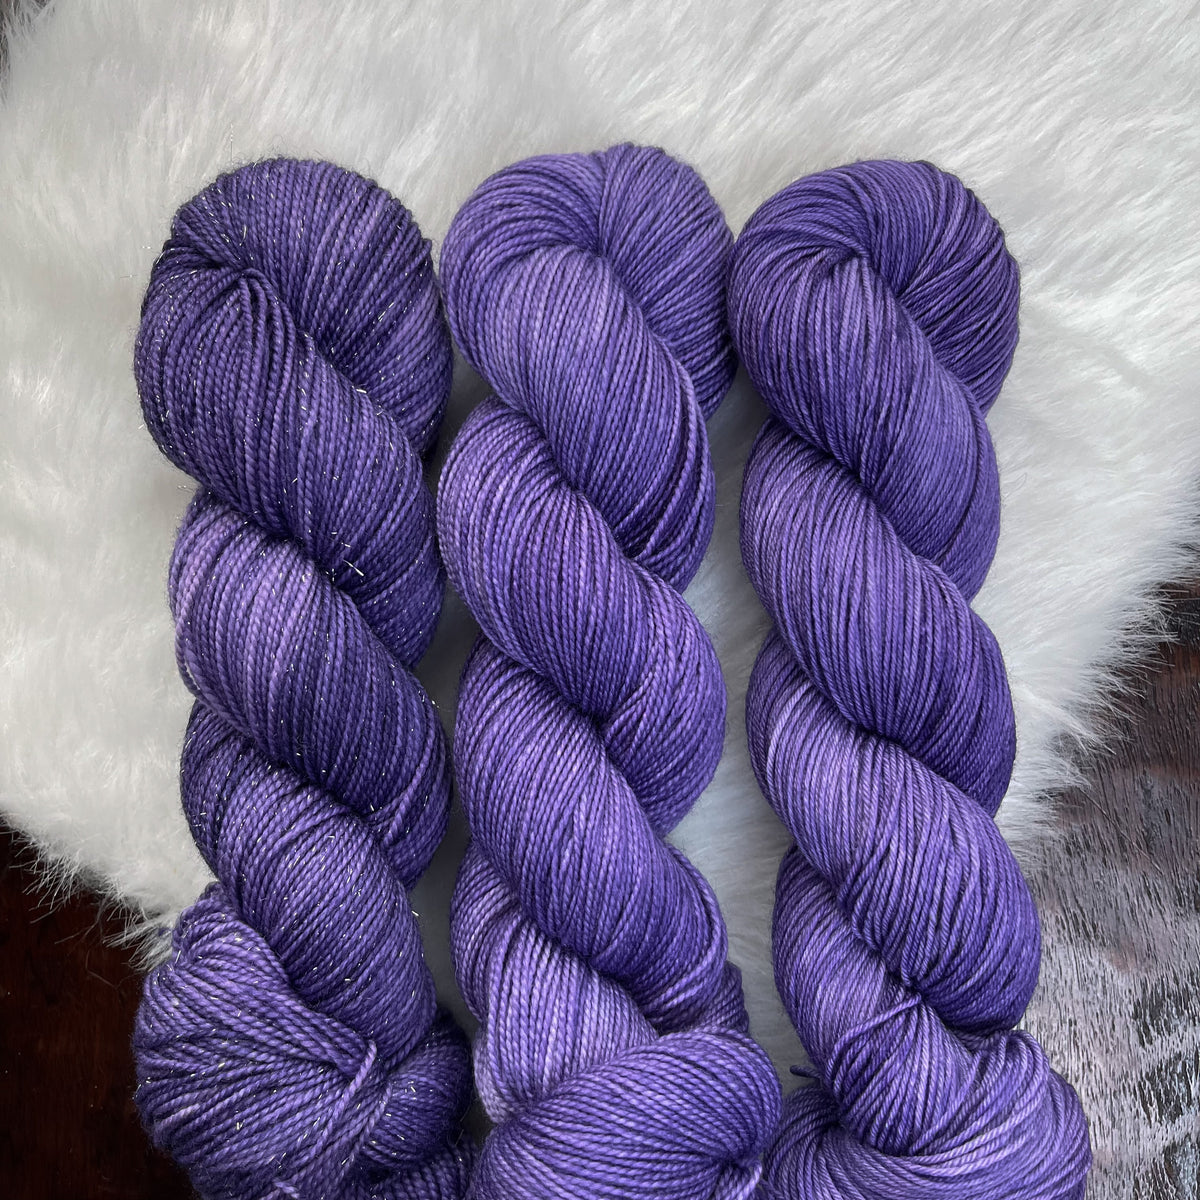 ENNUI  - Dyed to Order - Hand Dyed Yarn Skein